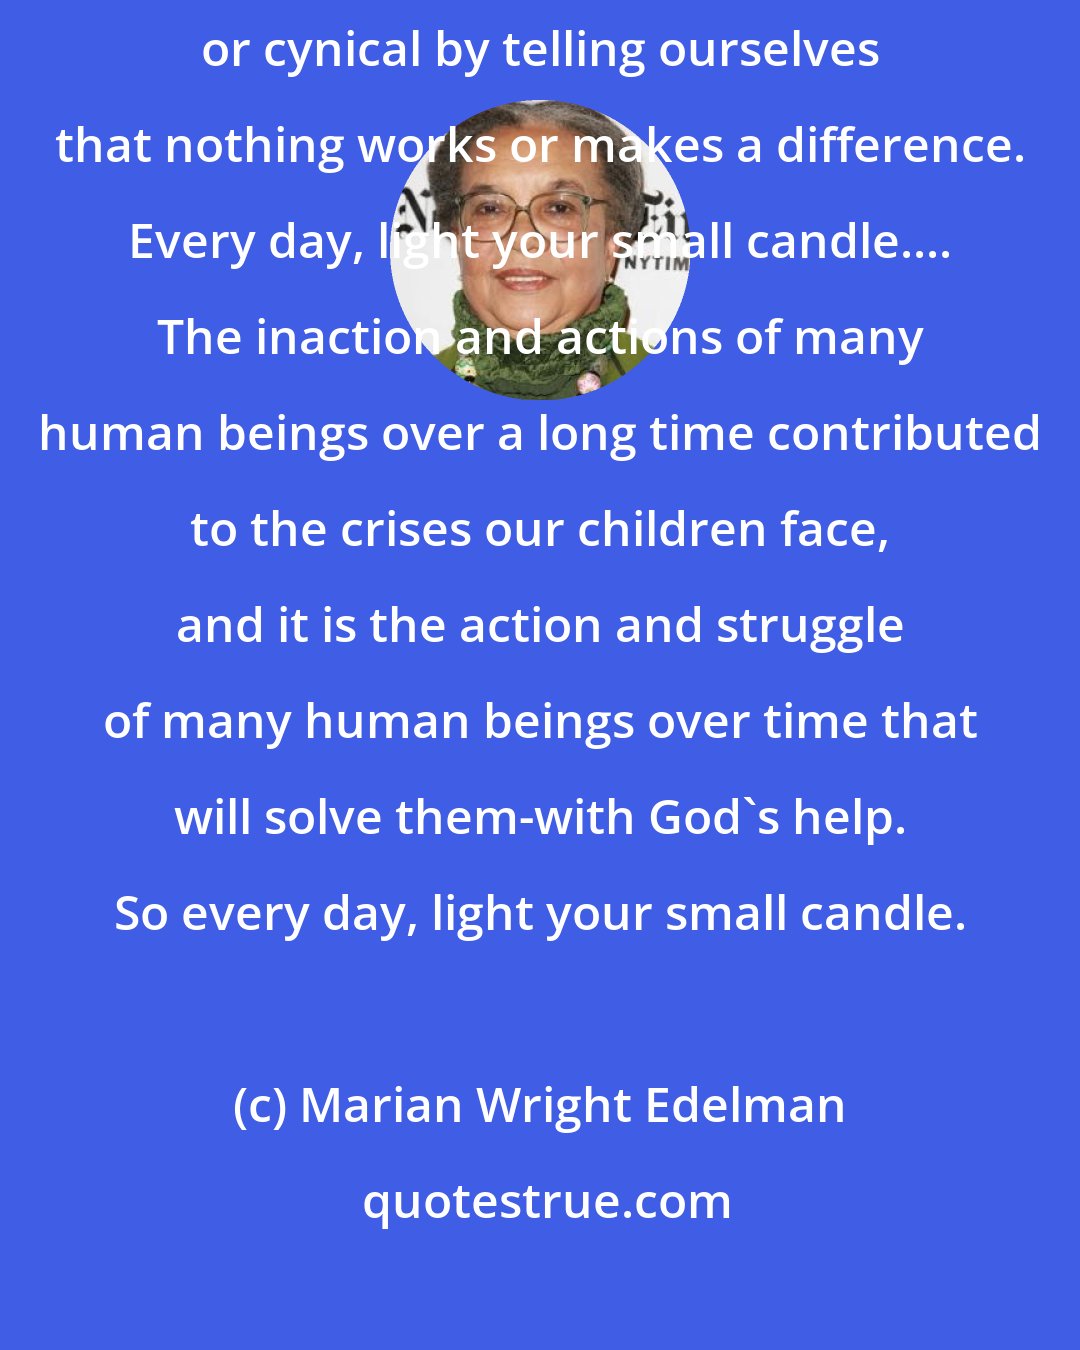 Marian Wright Edelman: It is so important not to let ourselves off the hook or to become apathetic or cynical by telling ourselves that nothing works or makes a difference. Every day, light your small candle.... The inaction and actions of many human beings over a long time contributed to the crises our children face, and it is the action and struggle of many human beings over time that will solve them-with God's help. So every day, light your small candle.